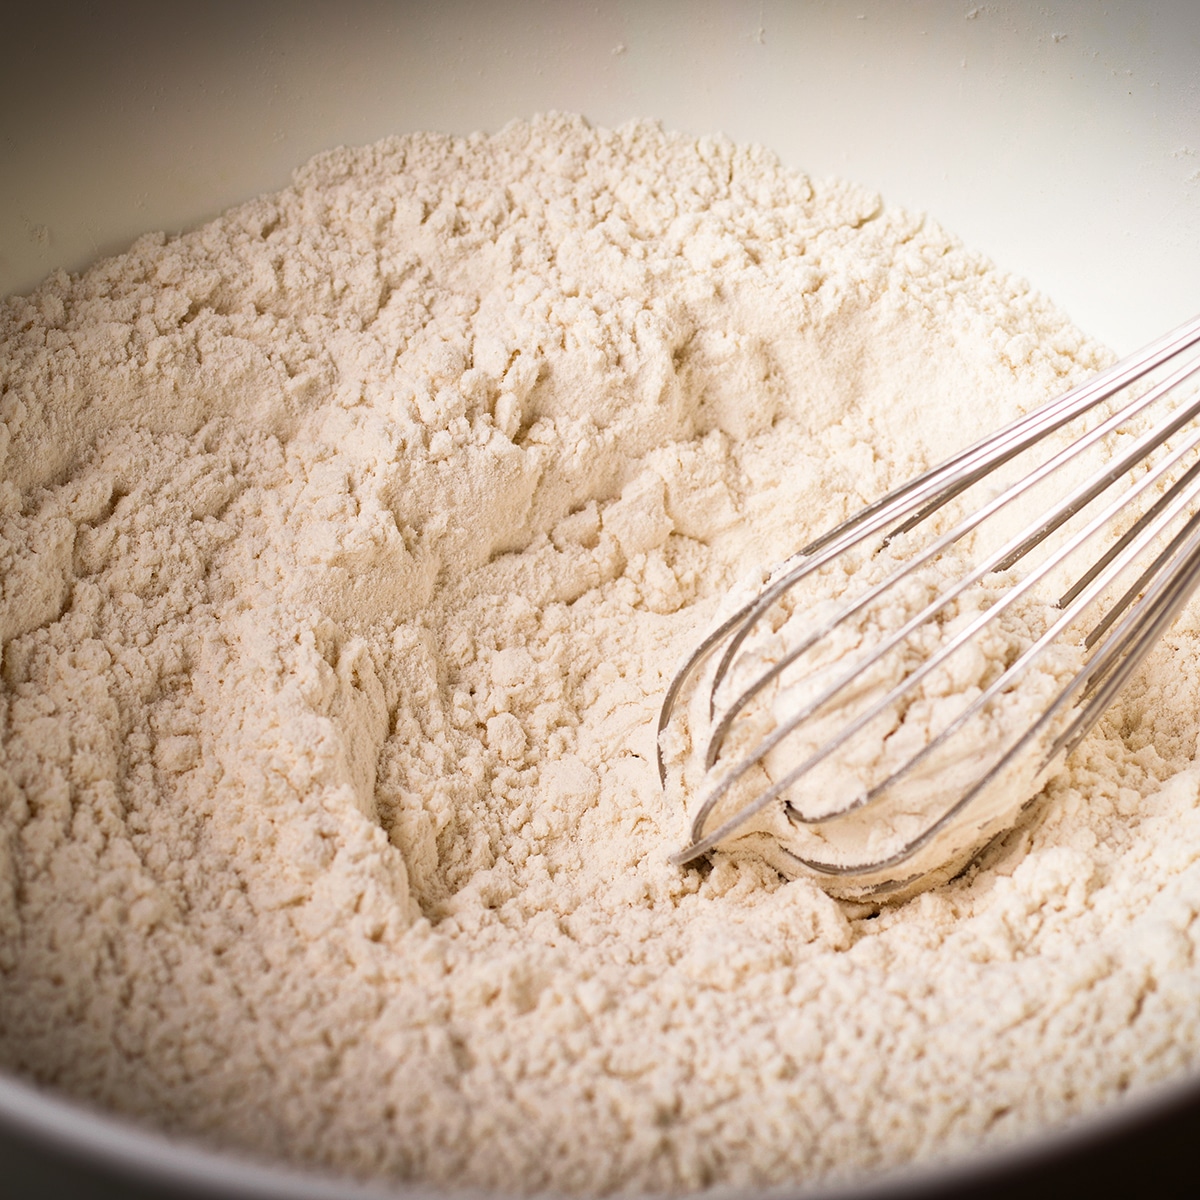 Using a wire whisk to stir flour, baking soda, cornstarch and salt in a white bowl.